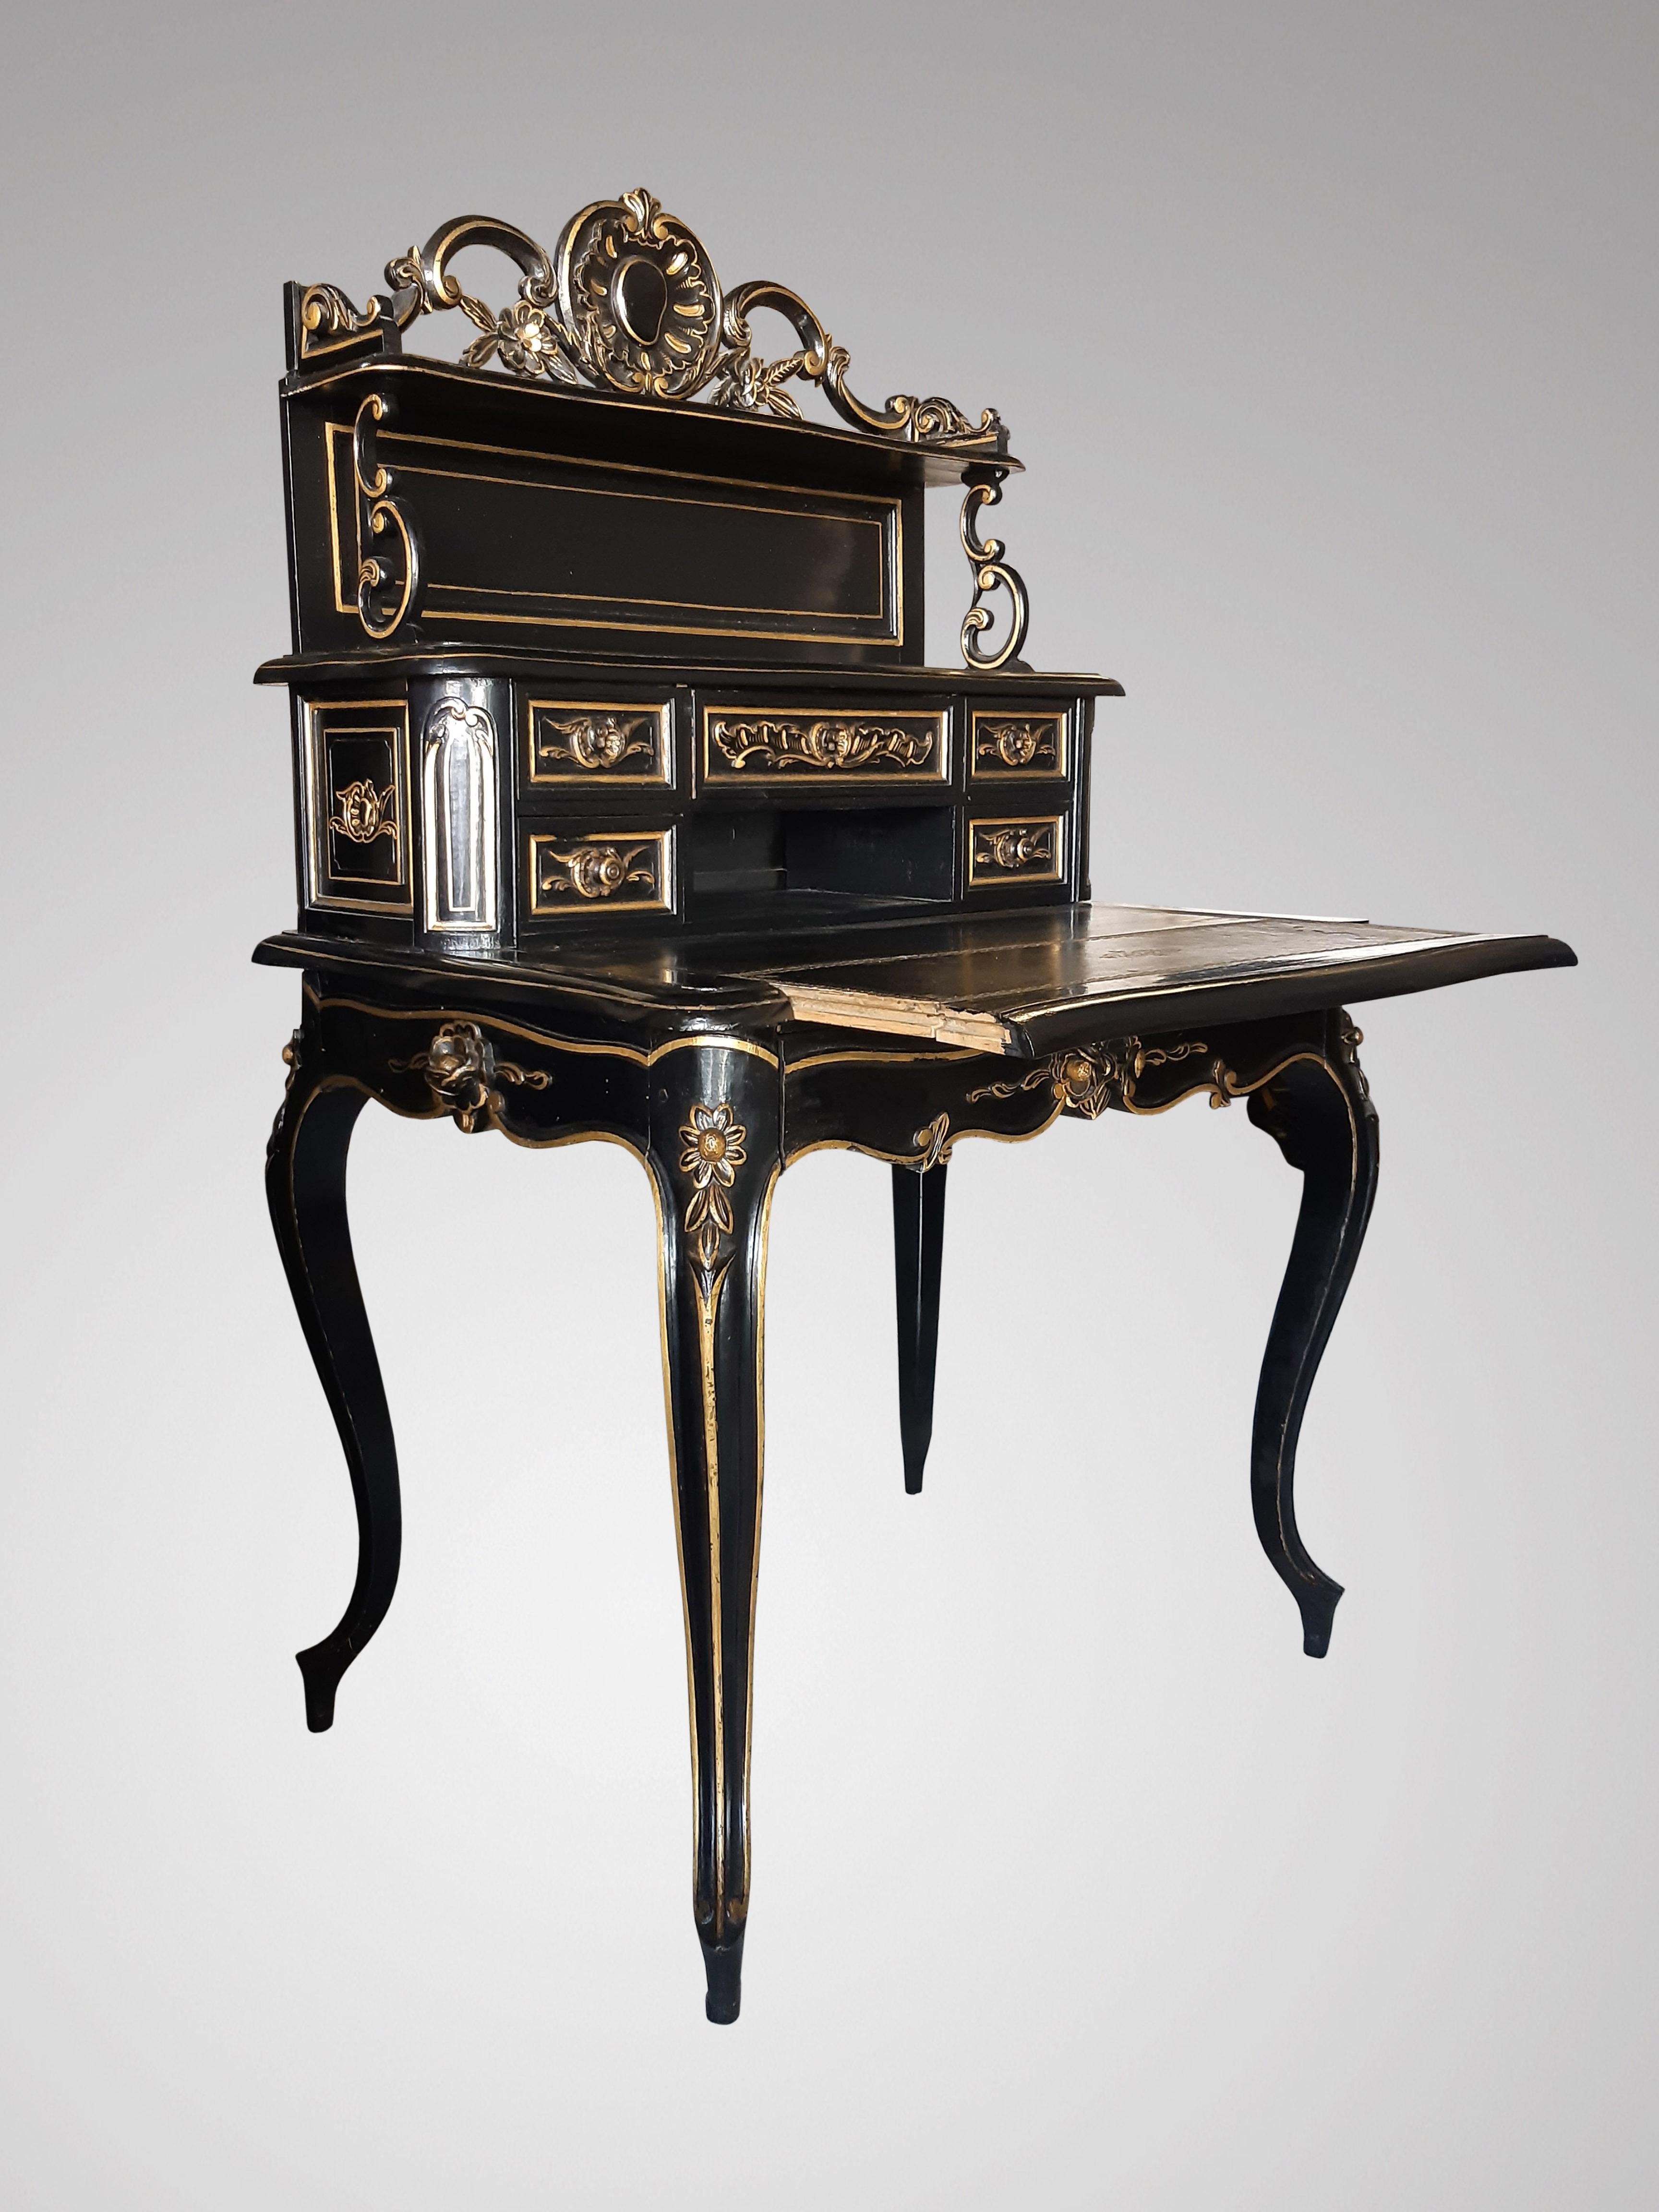 Pretty little happiness of the day with step, carved molded wood, black lacquer, gold color rechampi.
Opening with a frieze drawer, an open central compartment and five small drawers.
As you can see in the photos, some wear on the original